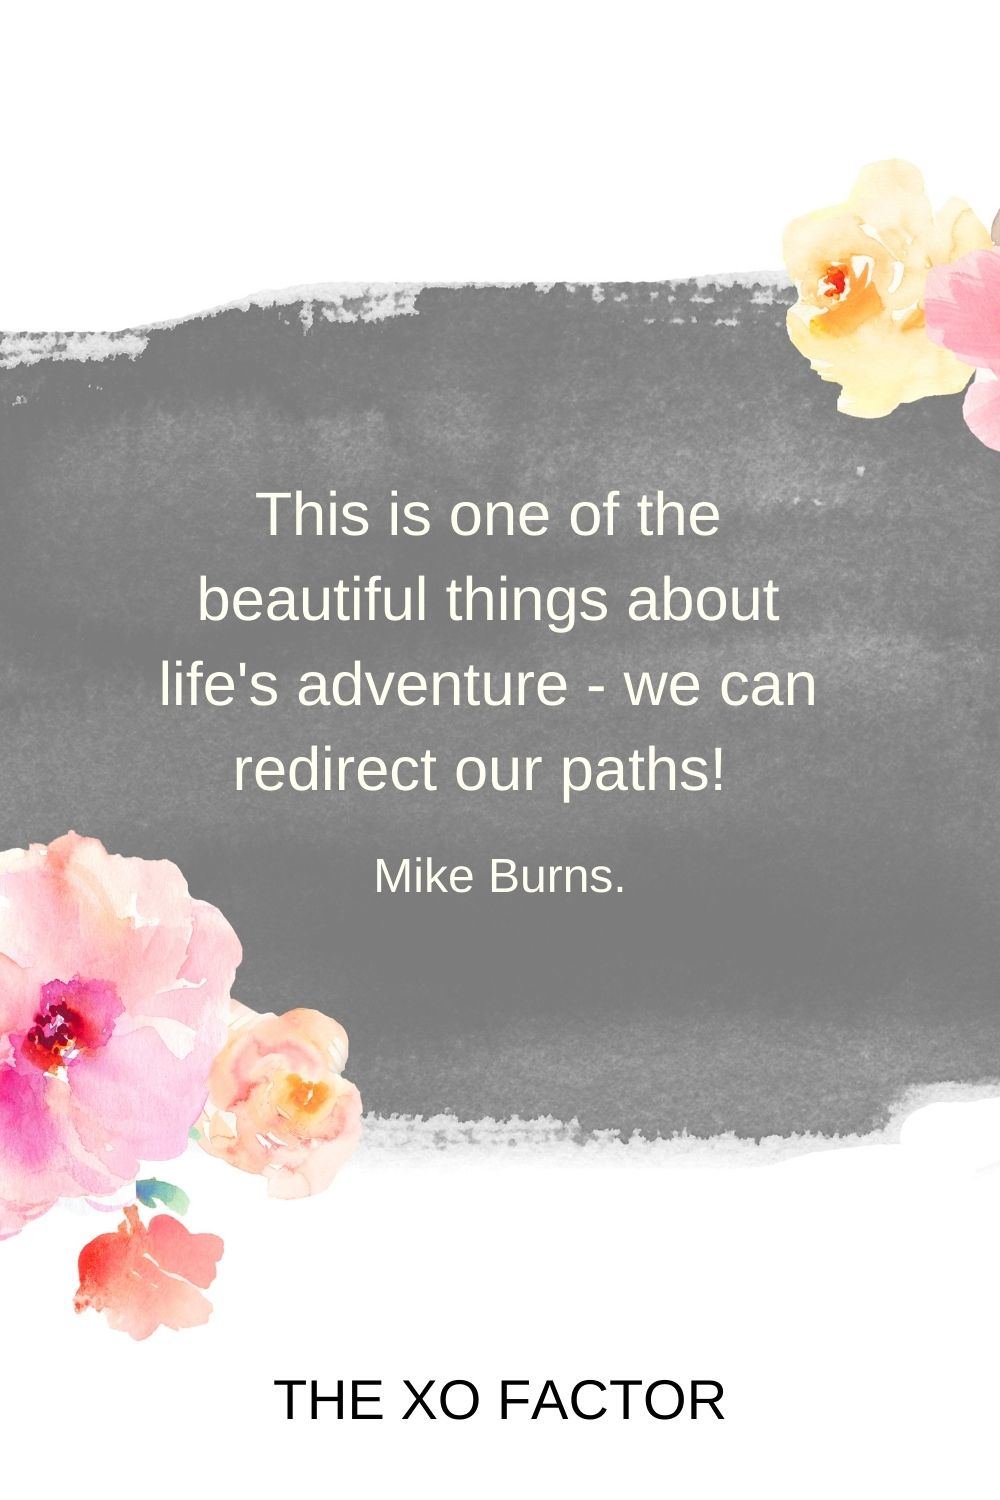 This is one of the beautiful things about life's adventure - we can redirect our paths!  Mike Burns.